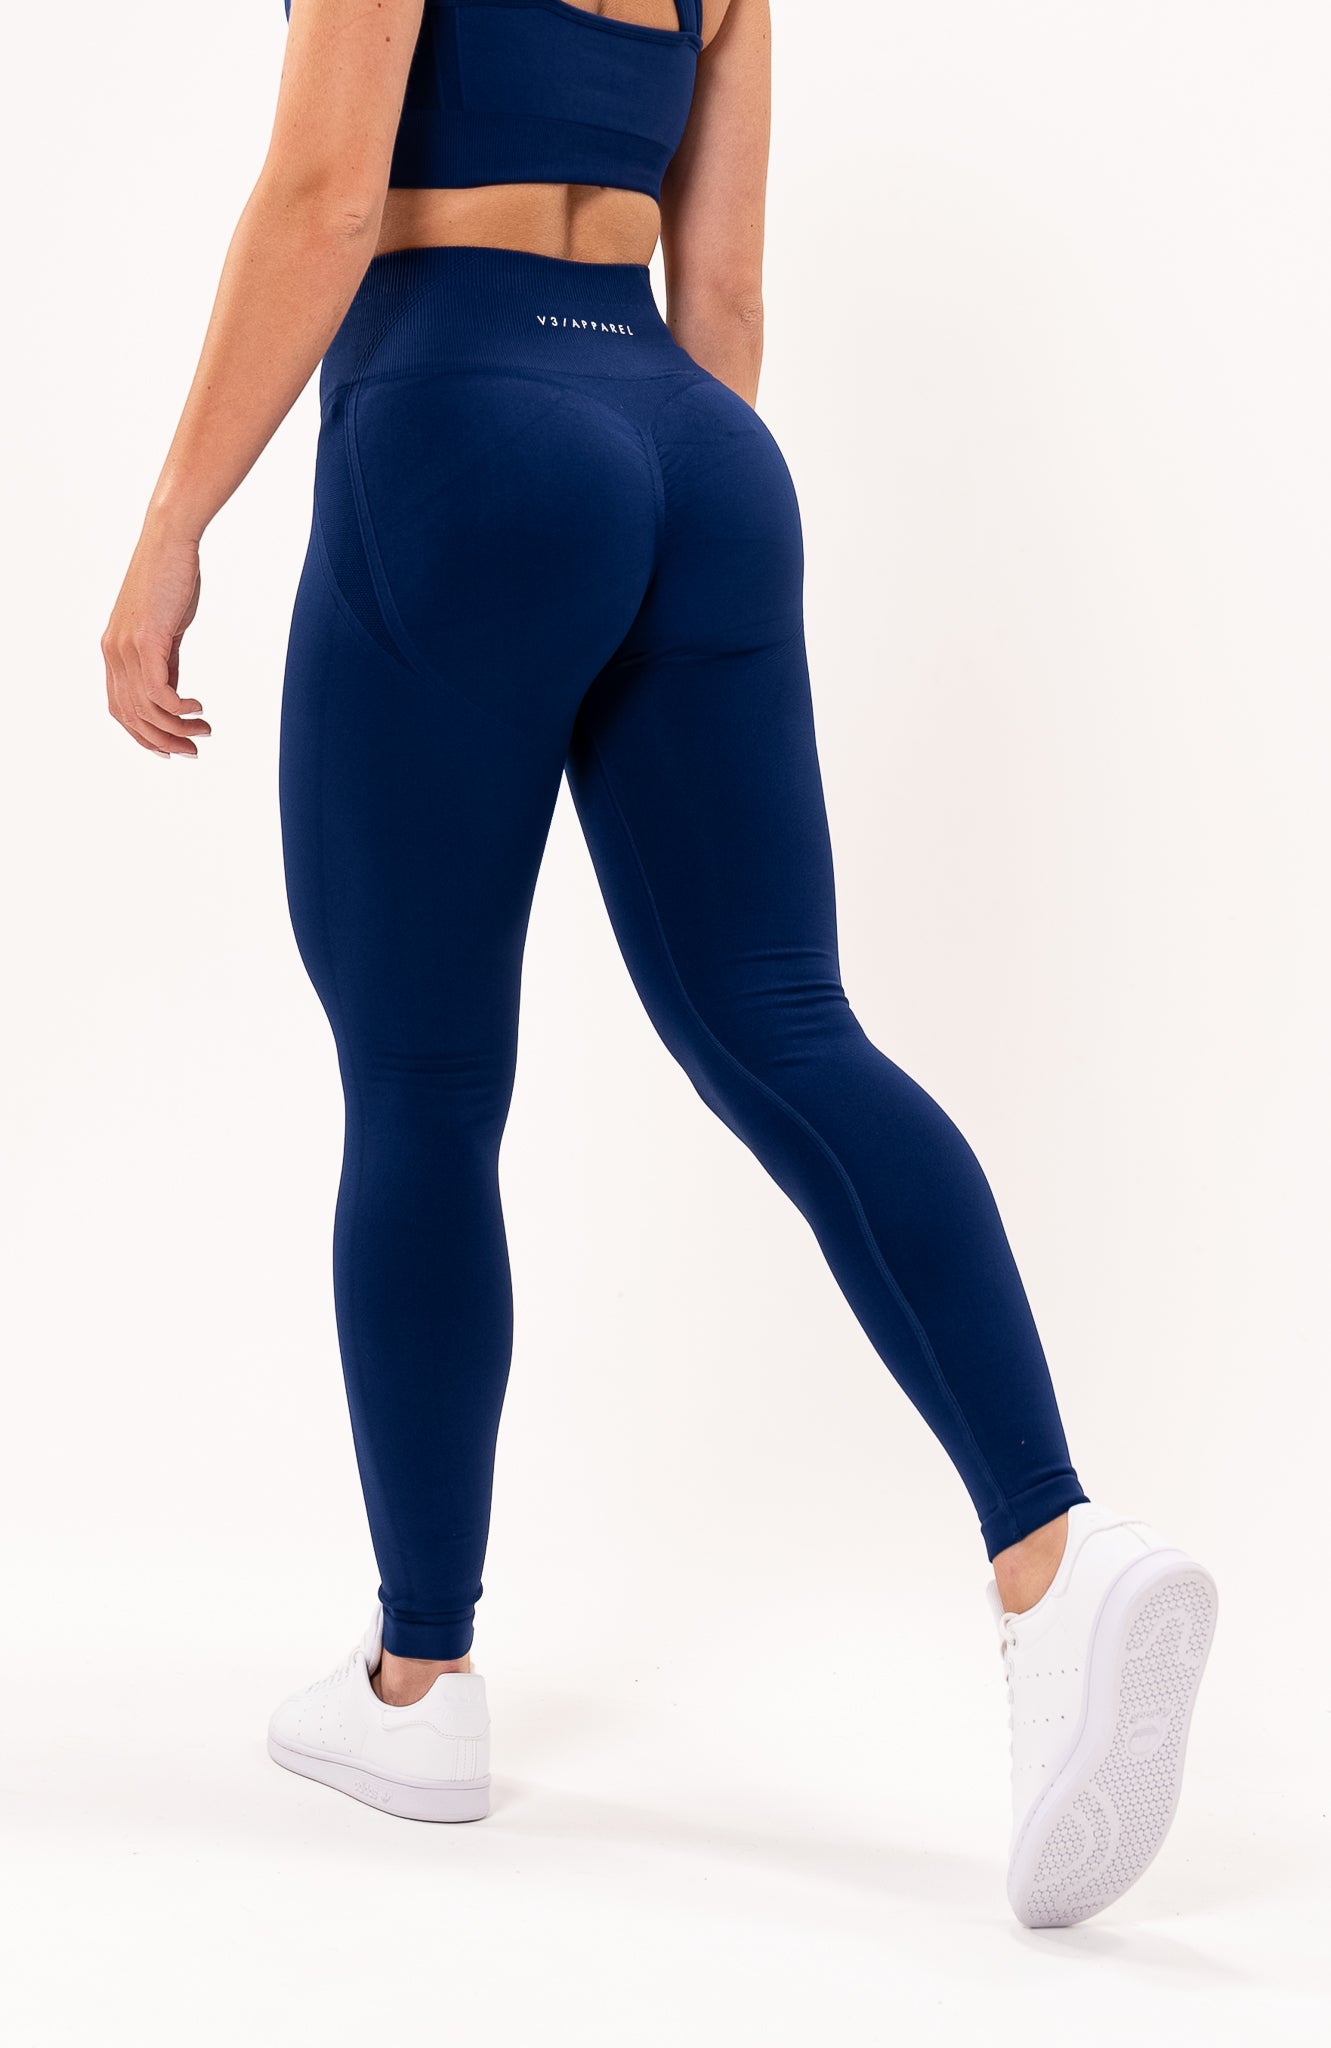 Buy Colourful Sexy Fitness Leggings for Women, Seamless Women Tights,  Exercise Leggings, Yoga Pants Online in India 